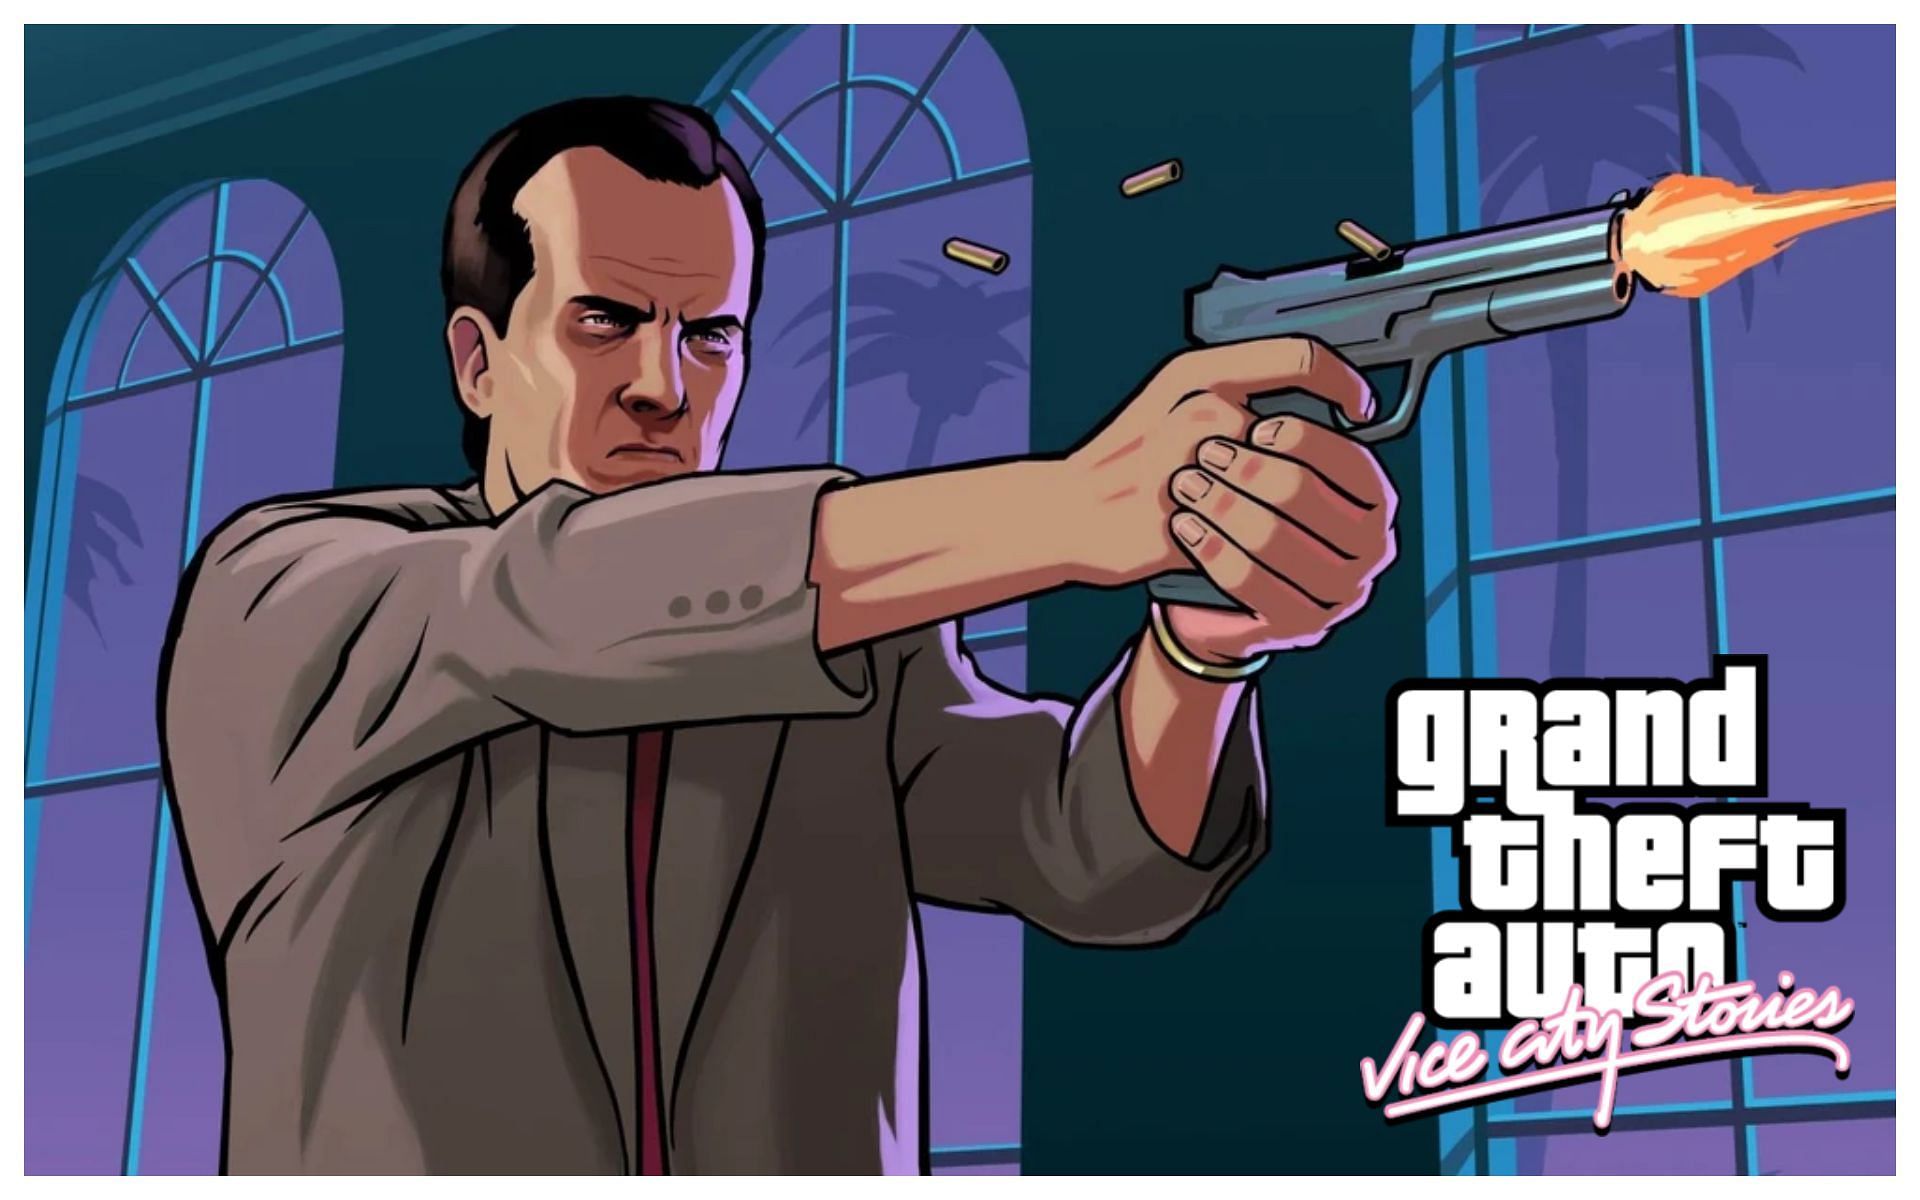 Looks better than Definitive Edition” Fans react to GTA Vice City Stories  being played on the Xbox Series X